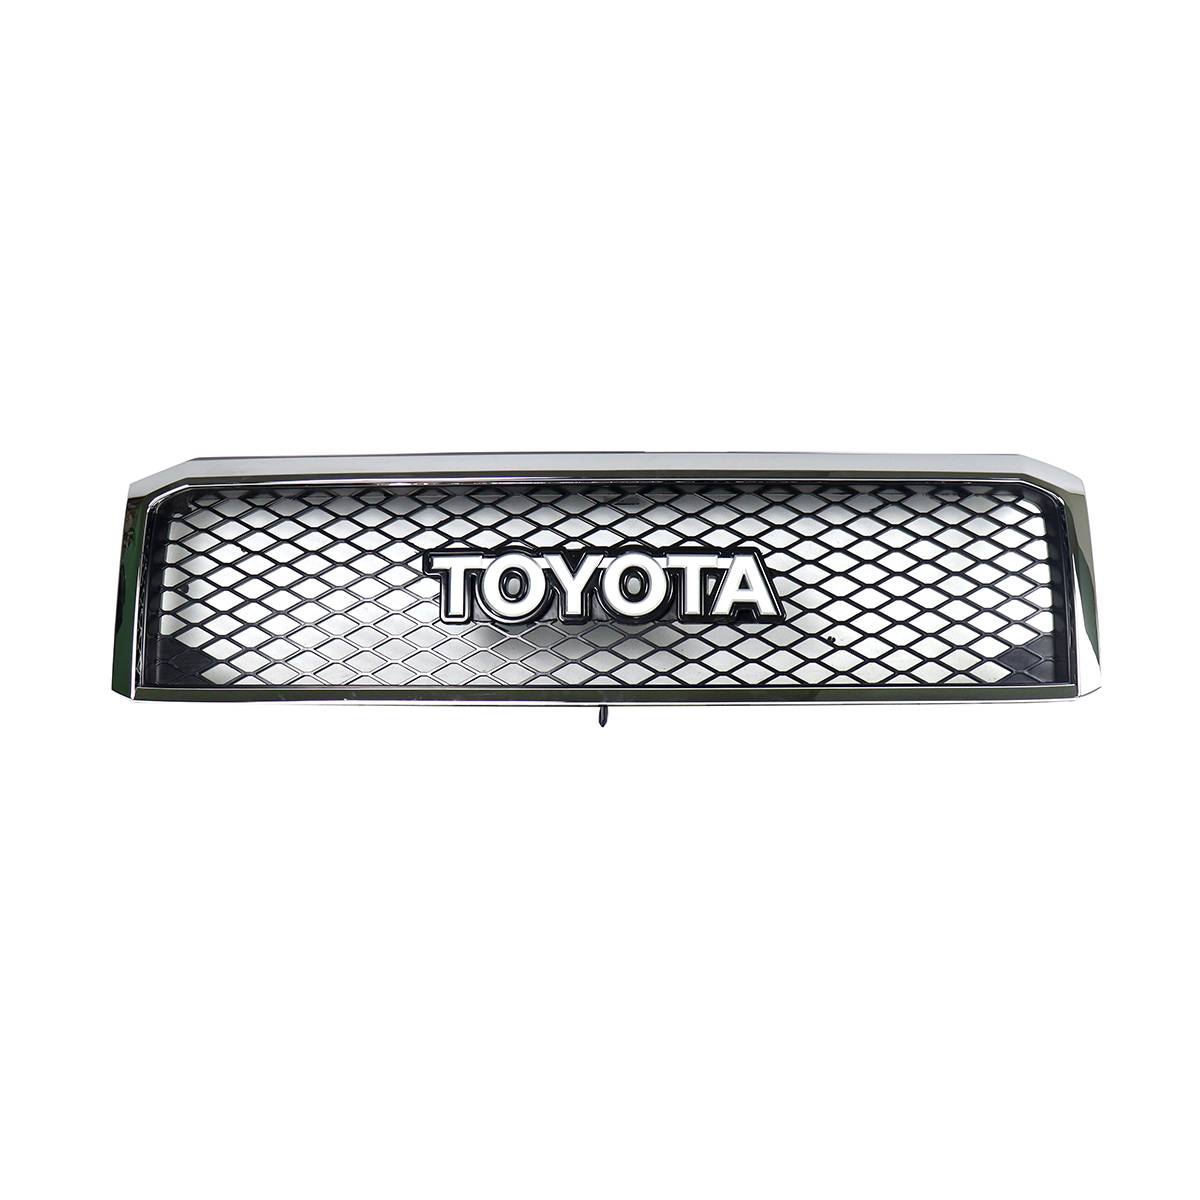 Chrome or Black Front Radiator Grille Grill 53101-60461 for Toyota Land Cruiser 70 Series Fj70 LC70 Fj79 LC79